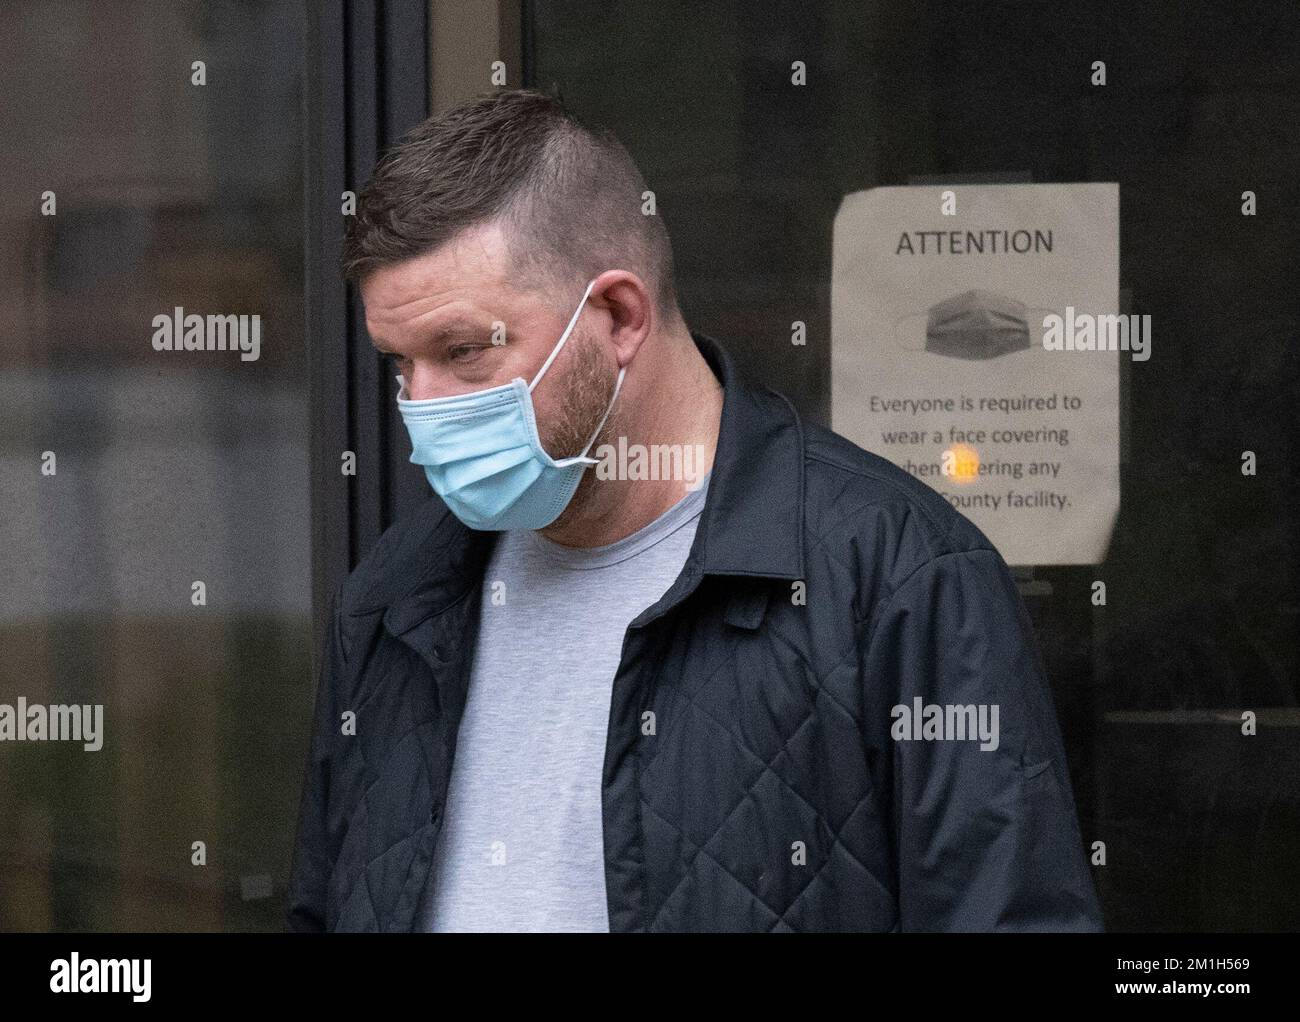 University of Texas men's basketball coach CHRIS BEARD (l) leaves the Travis County jail after an 11-hour lockup for an overnight domestic violence incident in Austin. Texas, ranked #6 in the country, faces Rice tonight, December 12, 2022. Credit: Bob Daemmrich/Alamy Live News Stock Photo